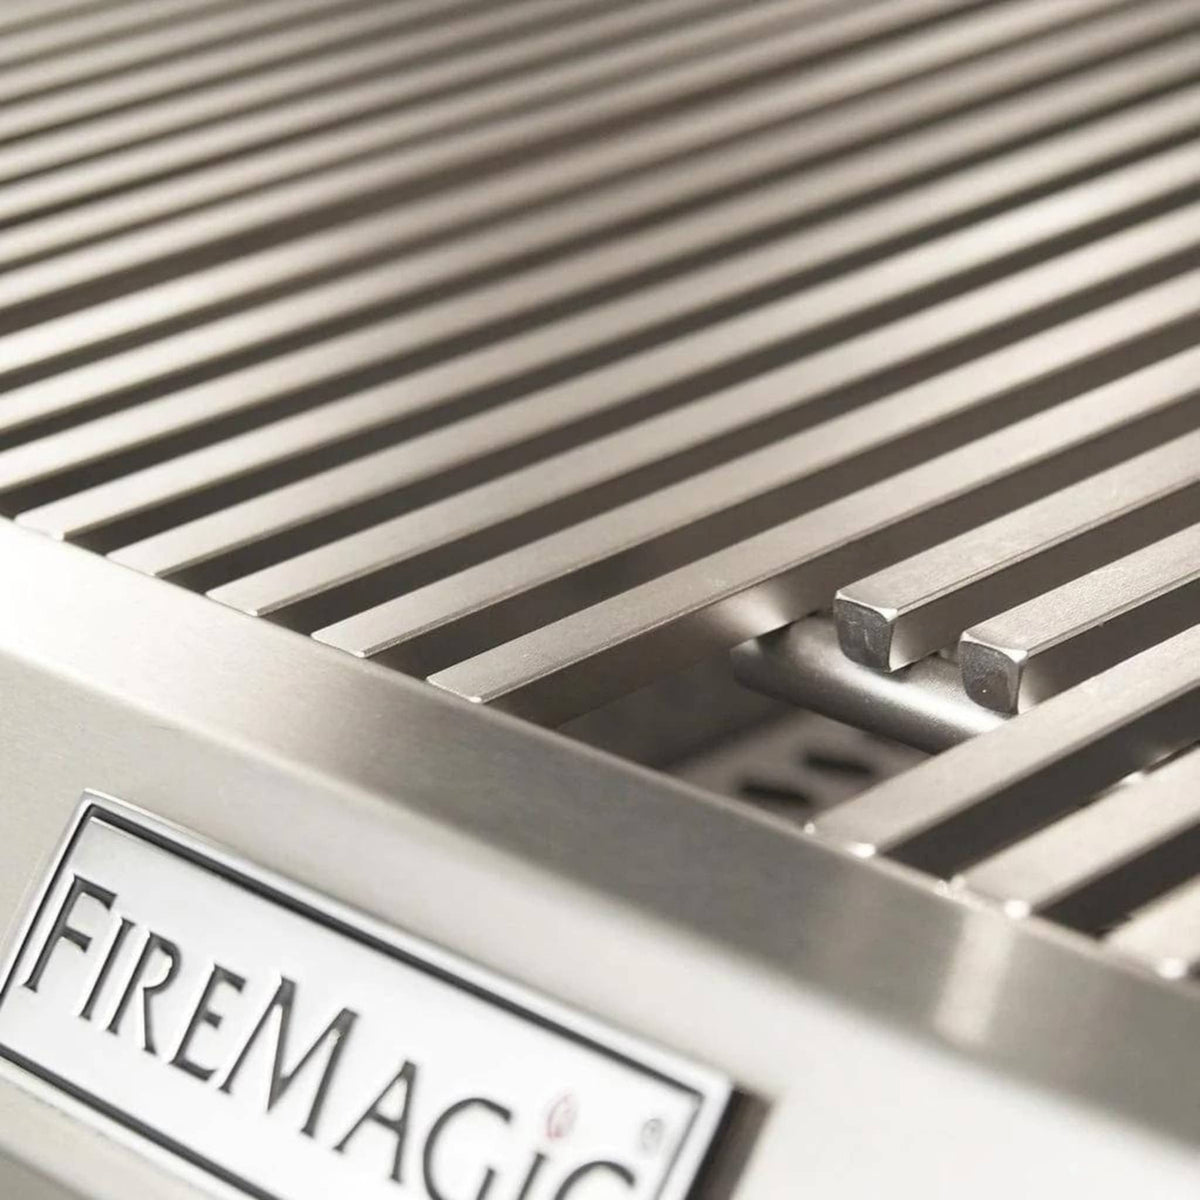 Fire Magic Choice 30&quot; Built-In Gas Grills with Analog Thermometer